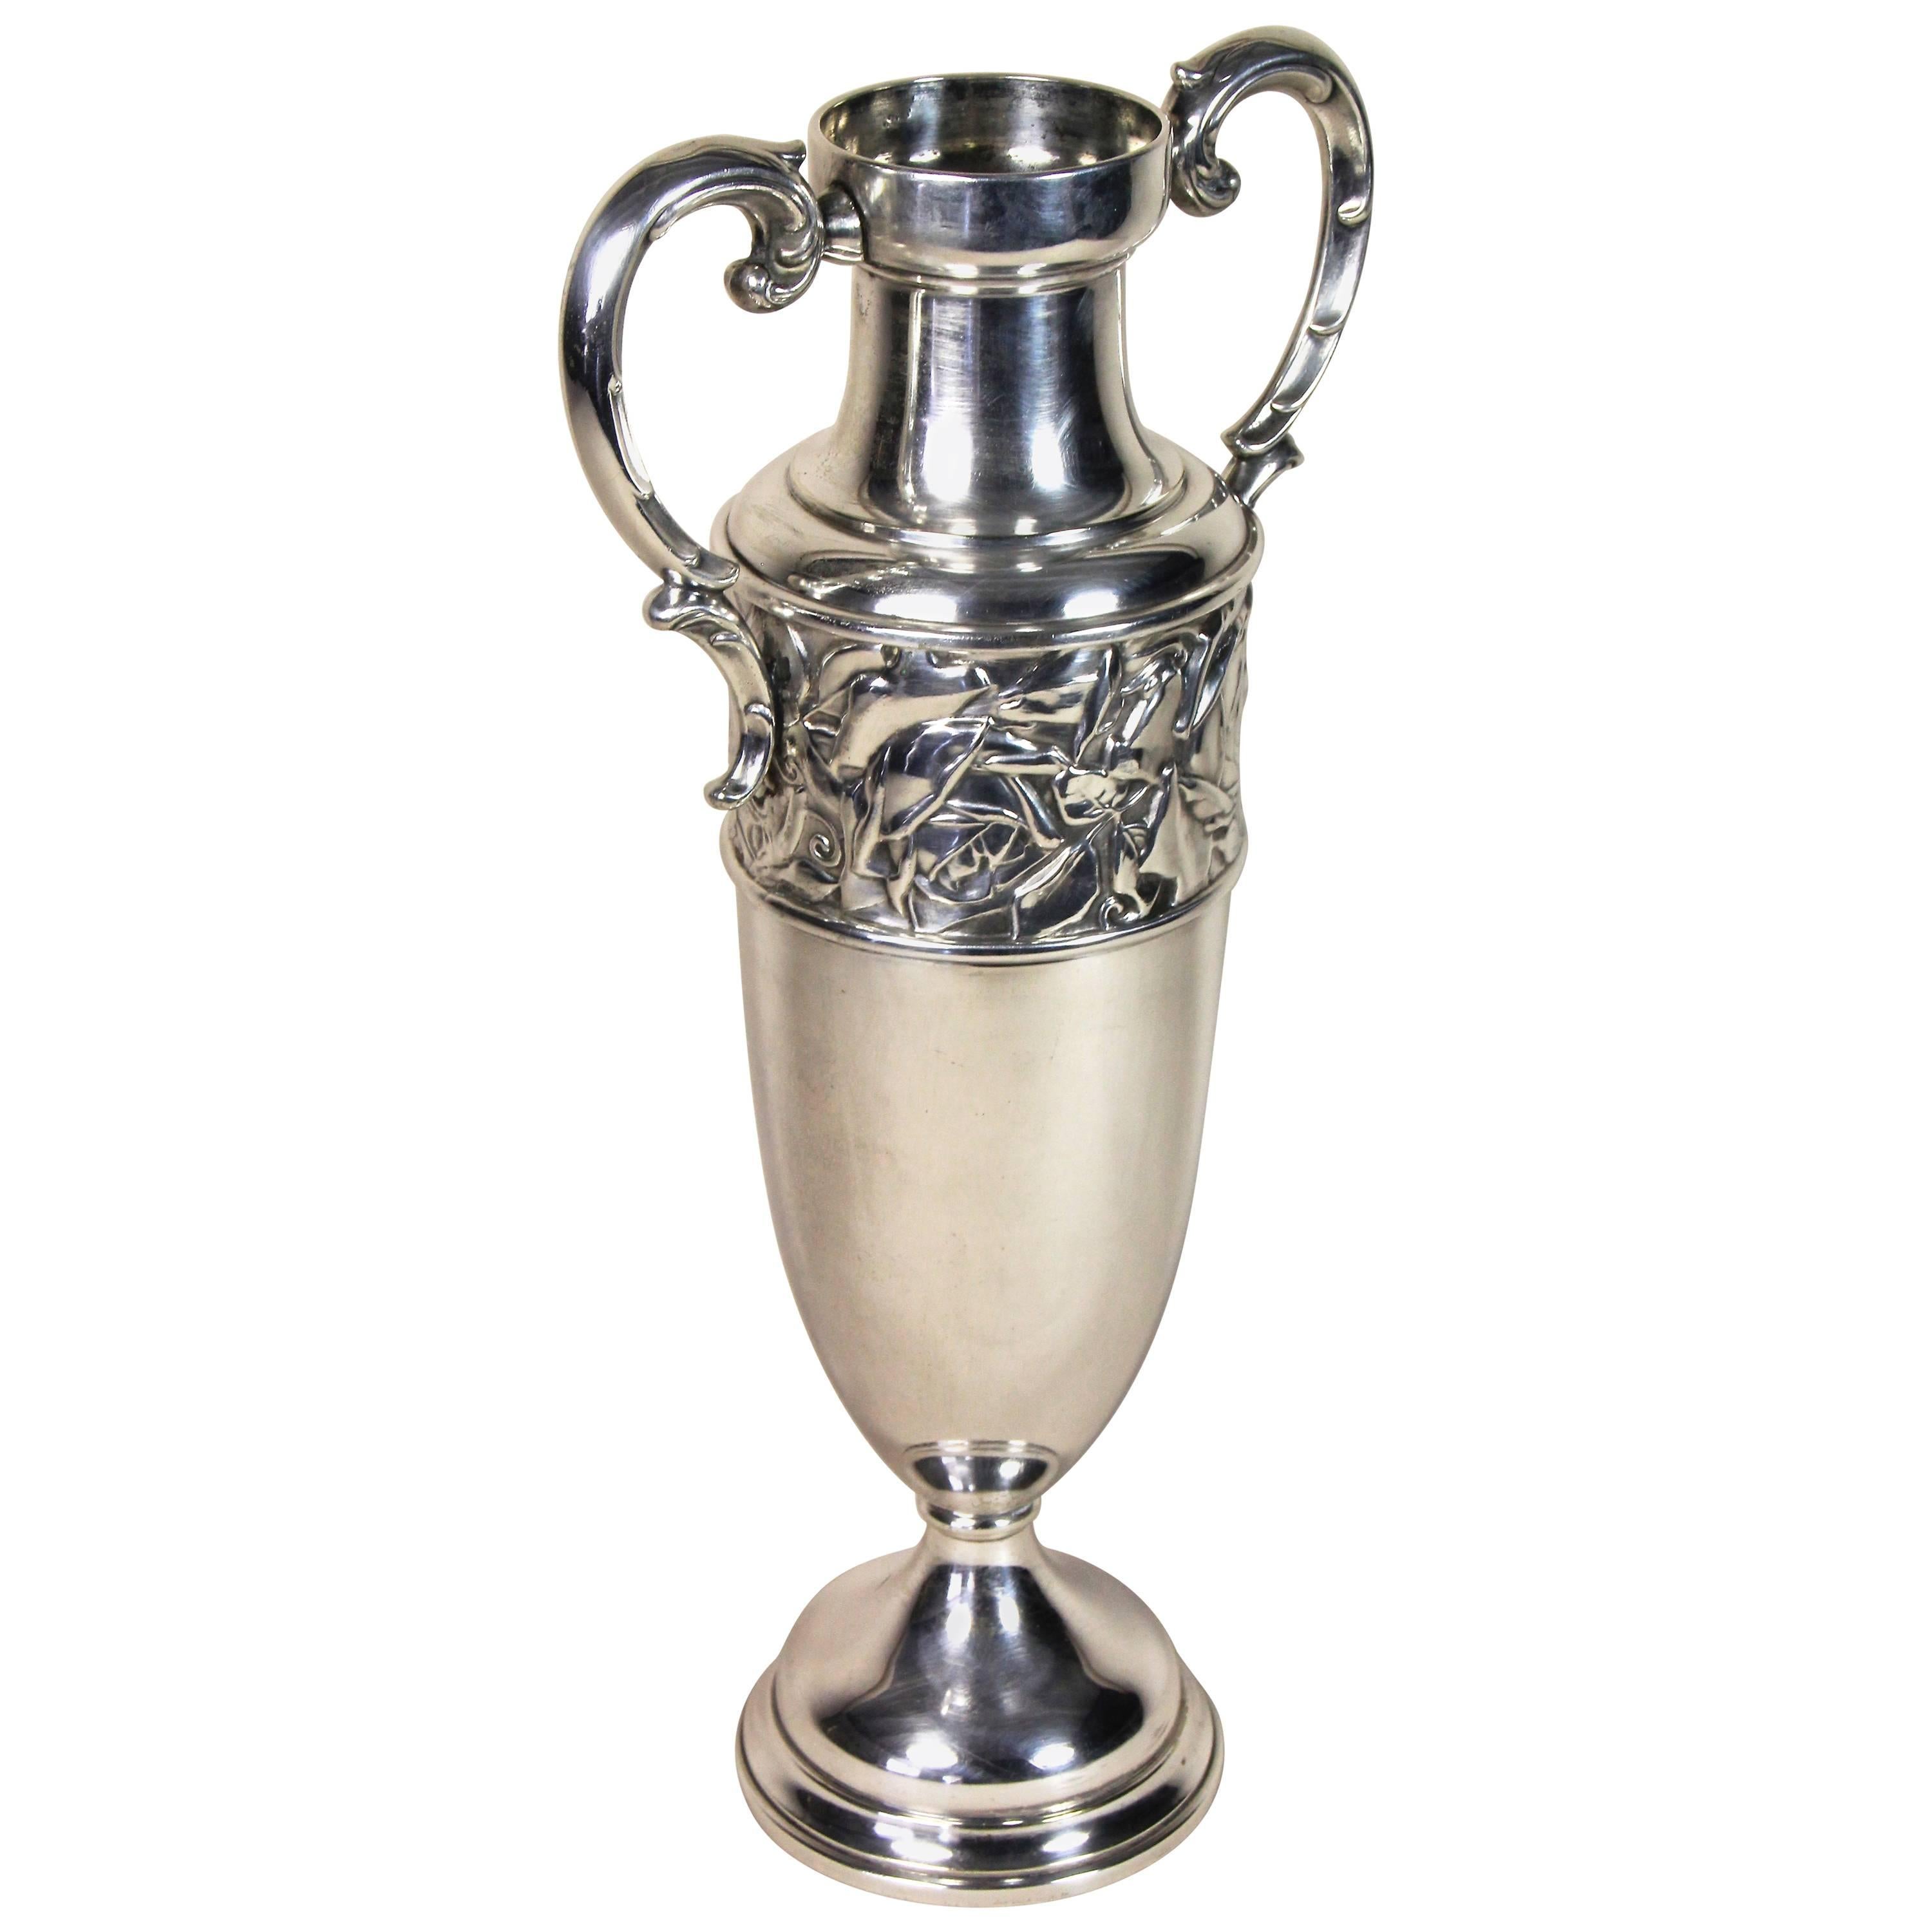 Spectacular silvered amphora vase from the renown Art Nouveau period in Slovakia around 1915. Artfully made of fine silvered brass it shows a fantastic shape adorned by lovely worked rose blooms and foliage. Another highlight are the beautifully